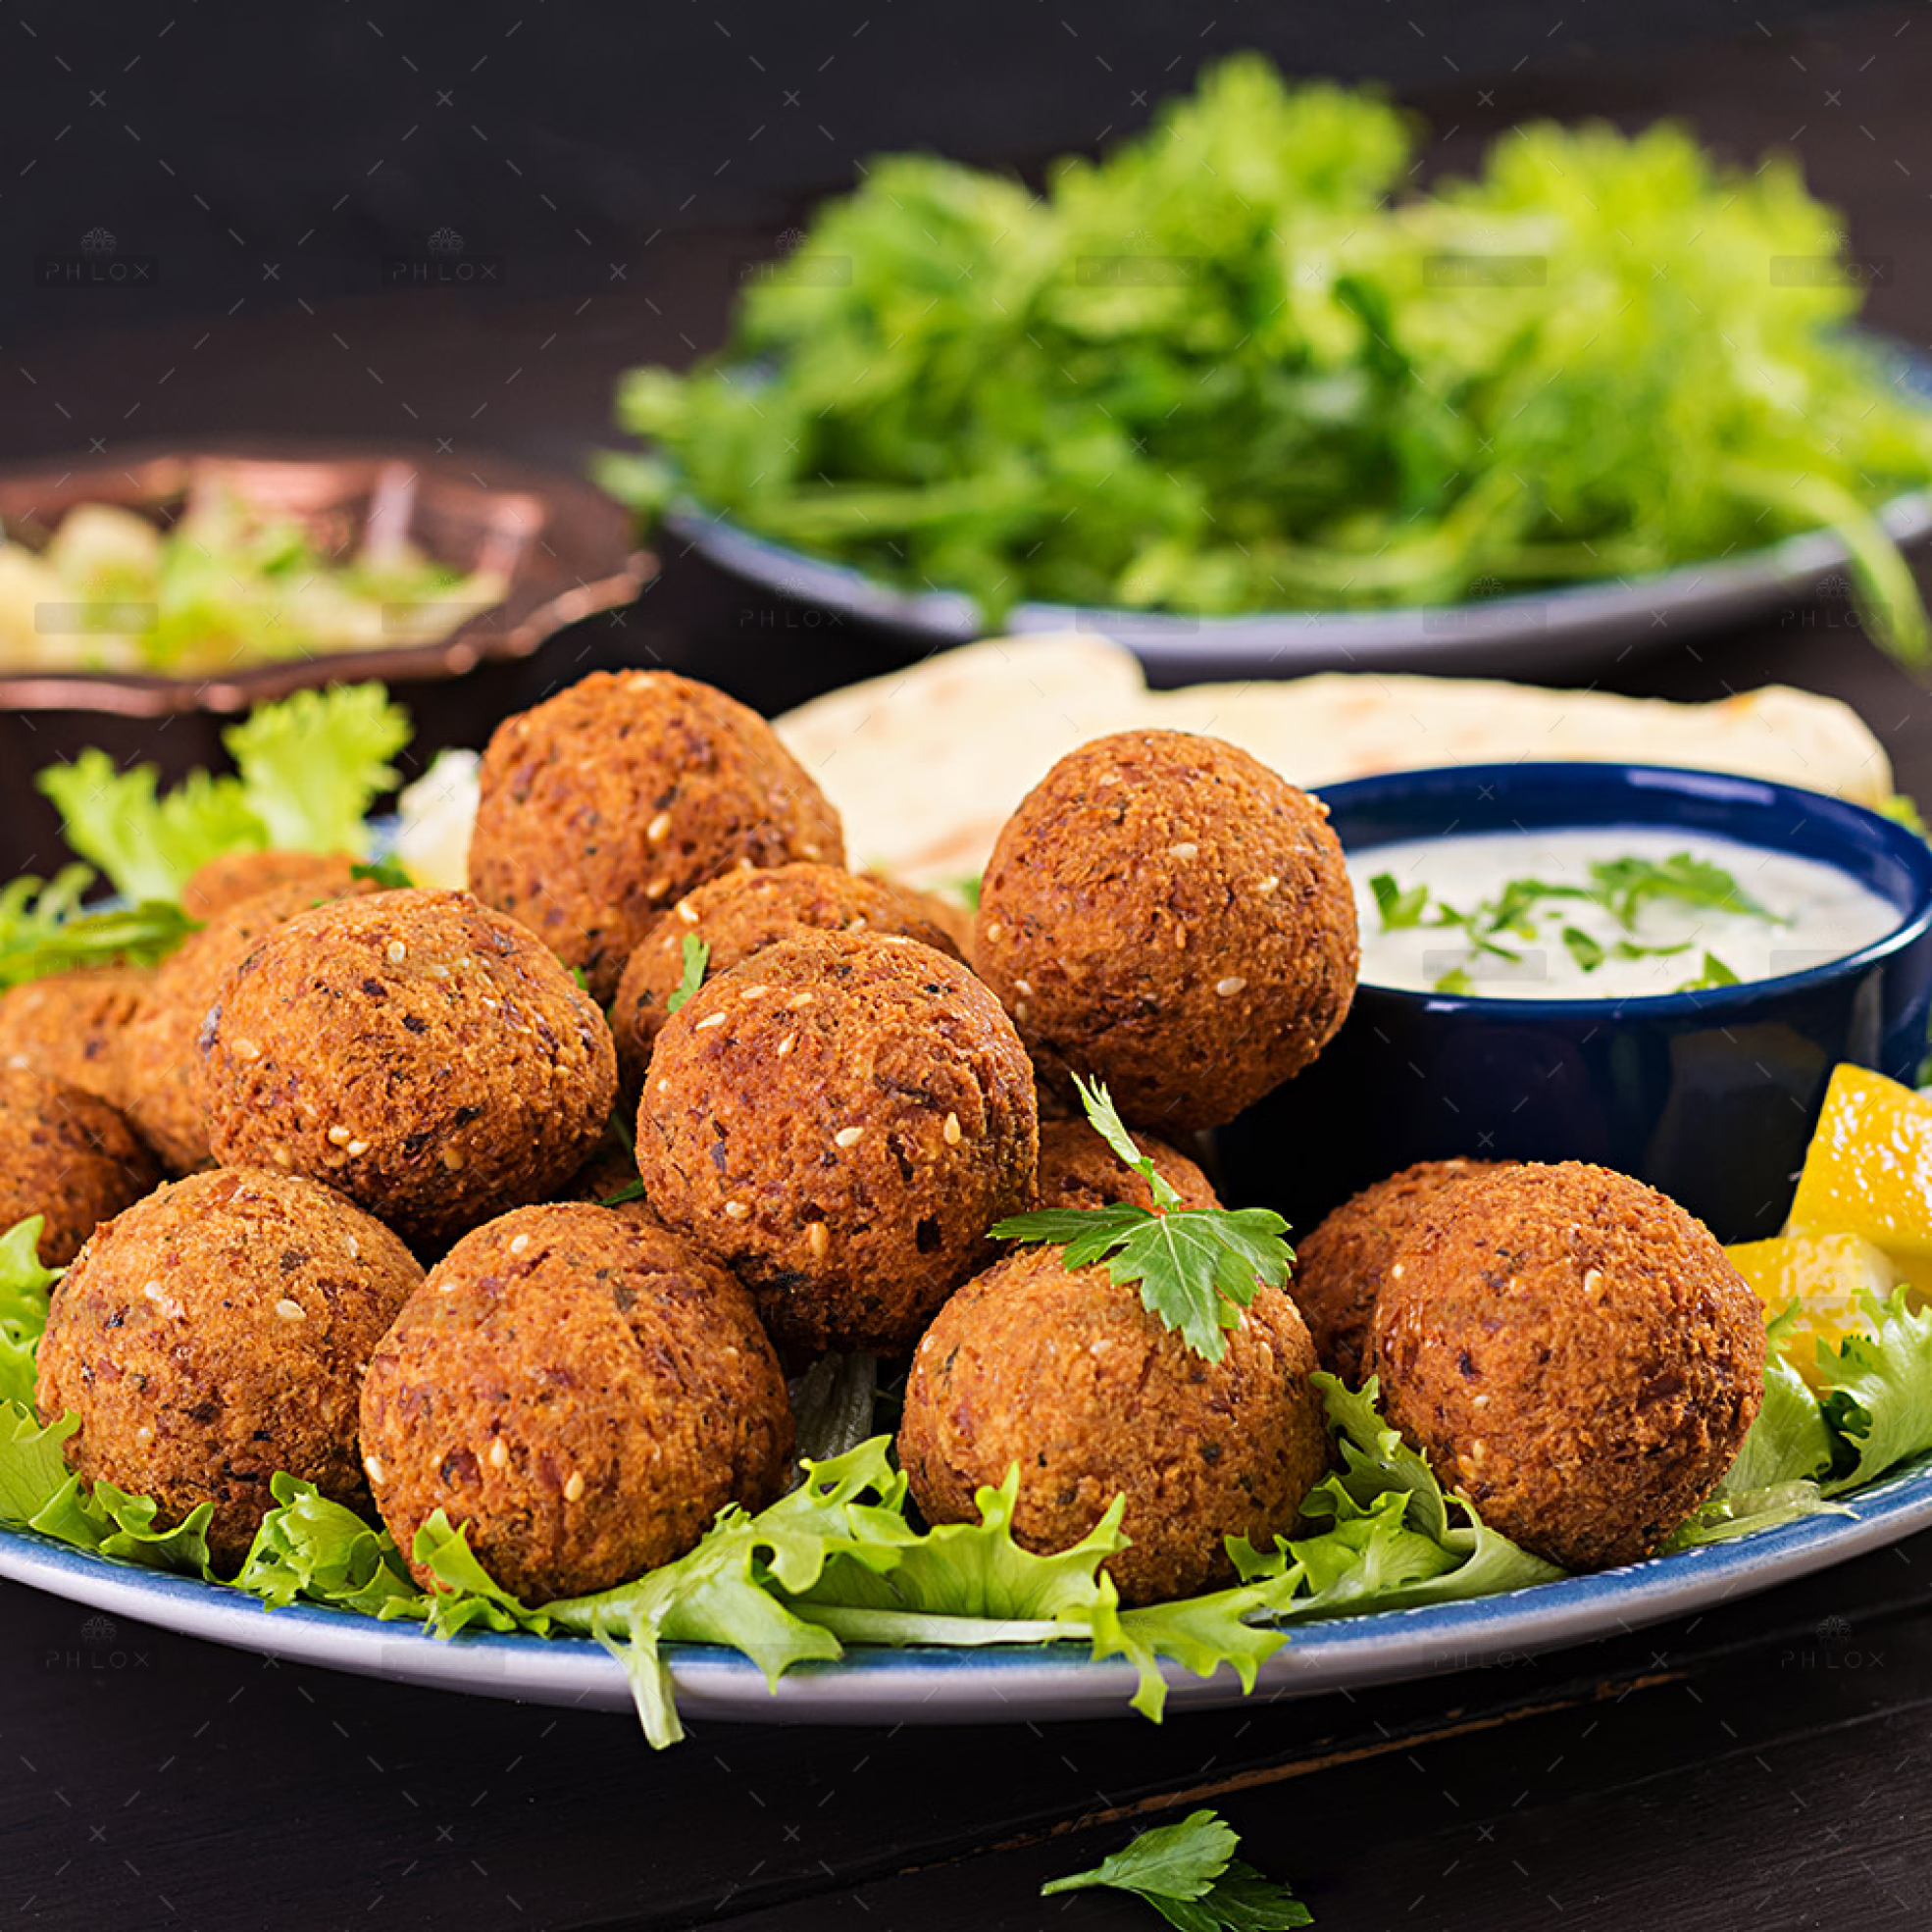 demo-attachment-154-falafel-hummus-and-pita-middle-eastern-or-arabic-FJKQUGT-copy